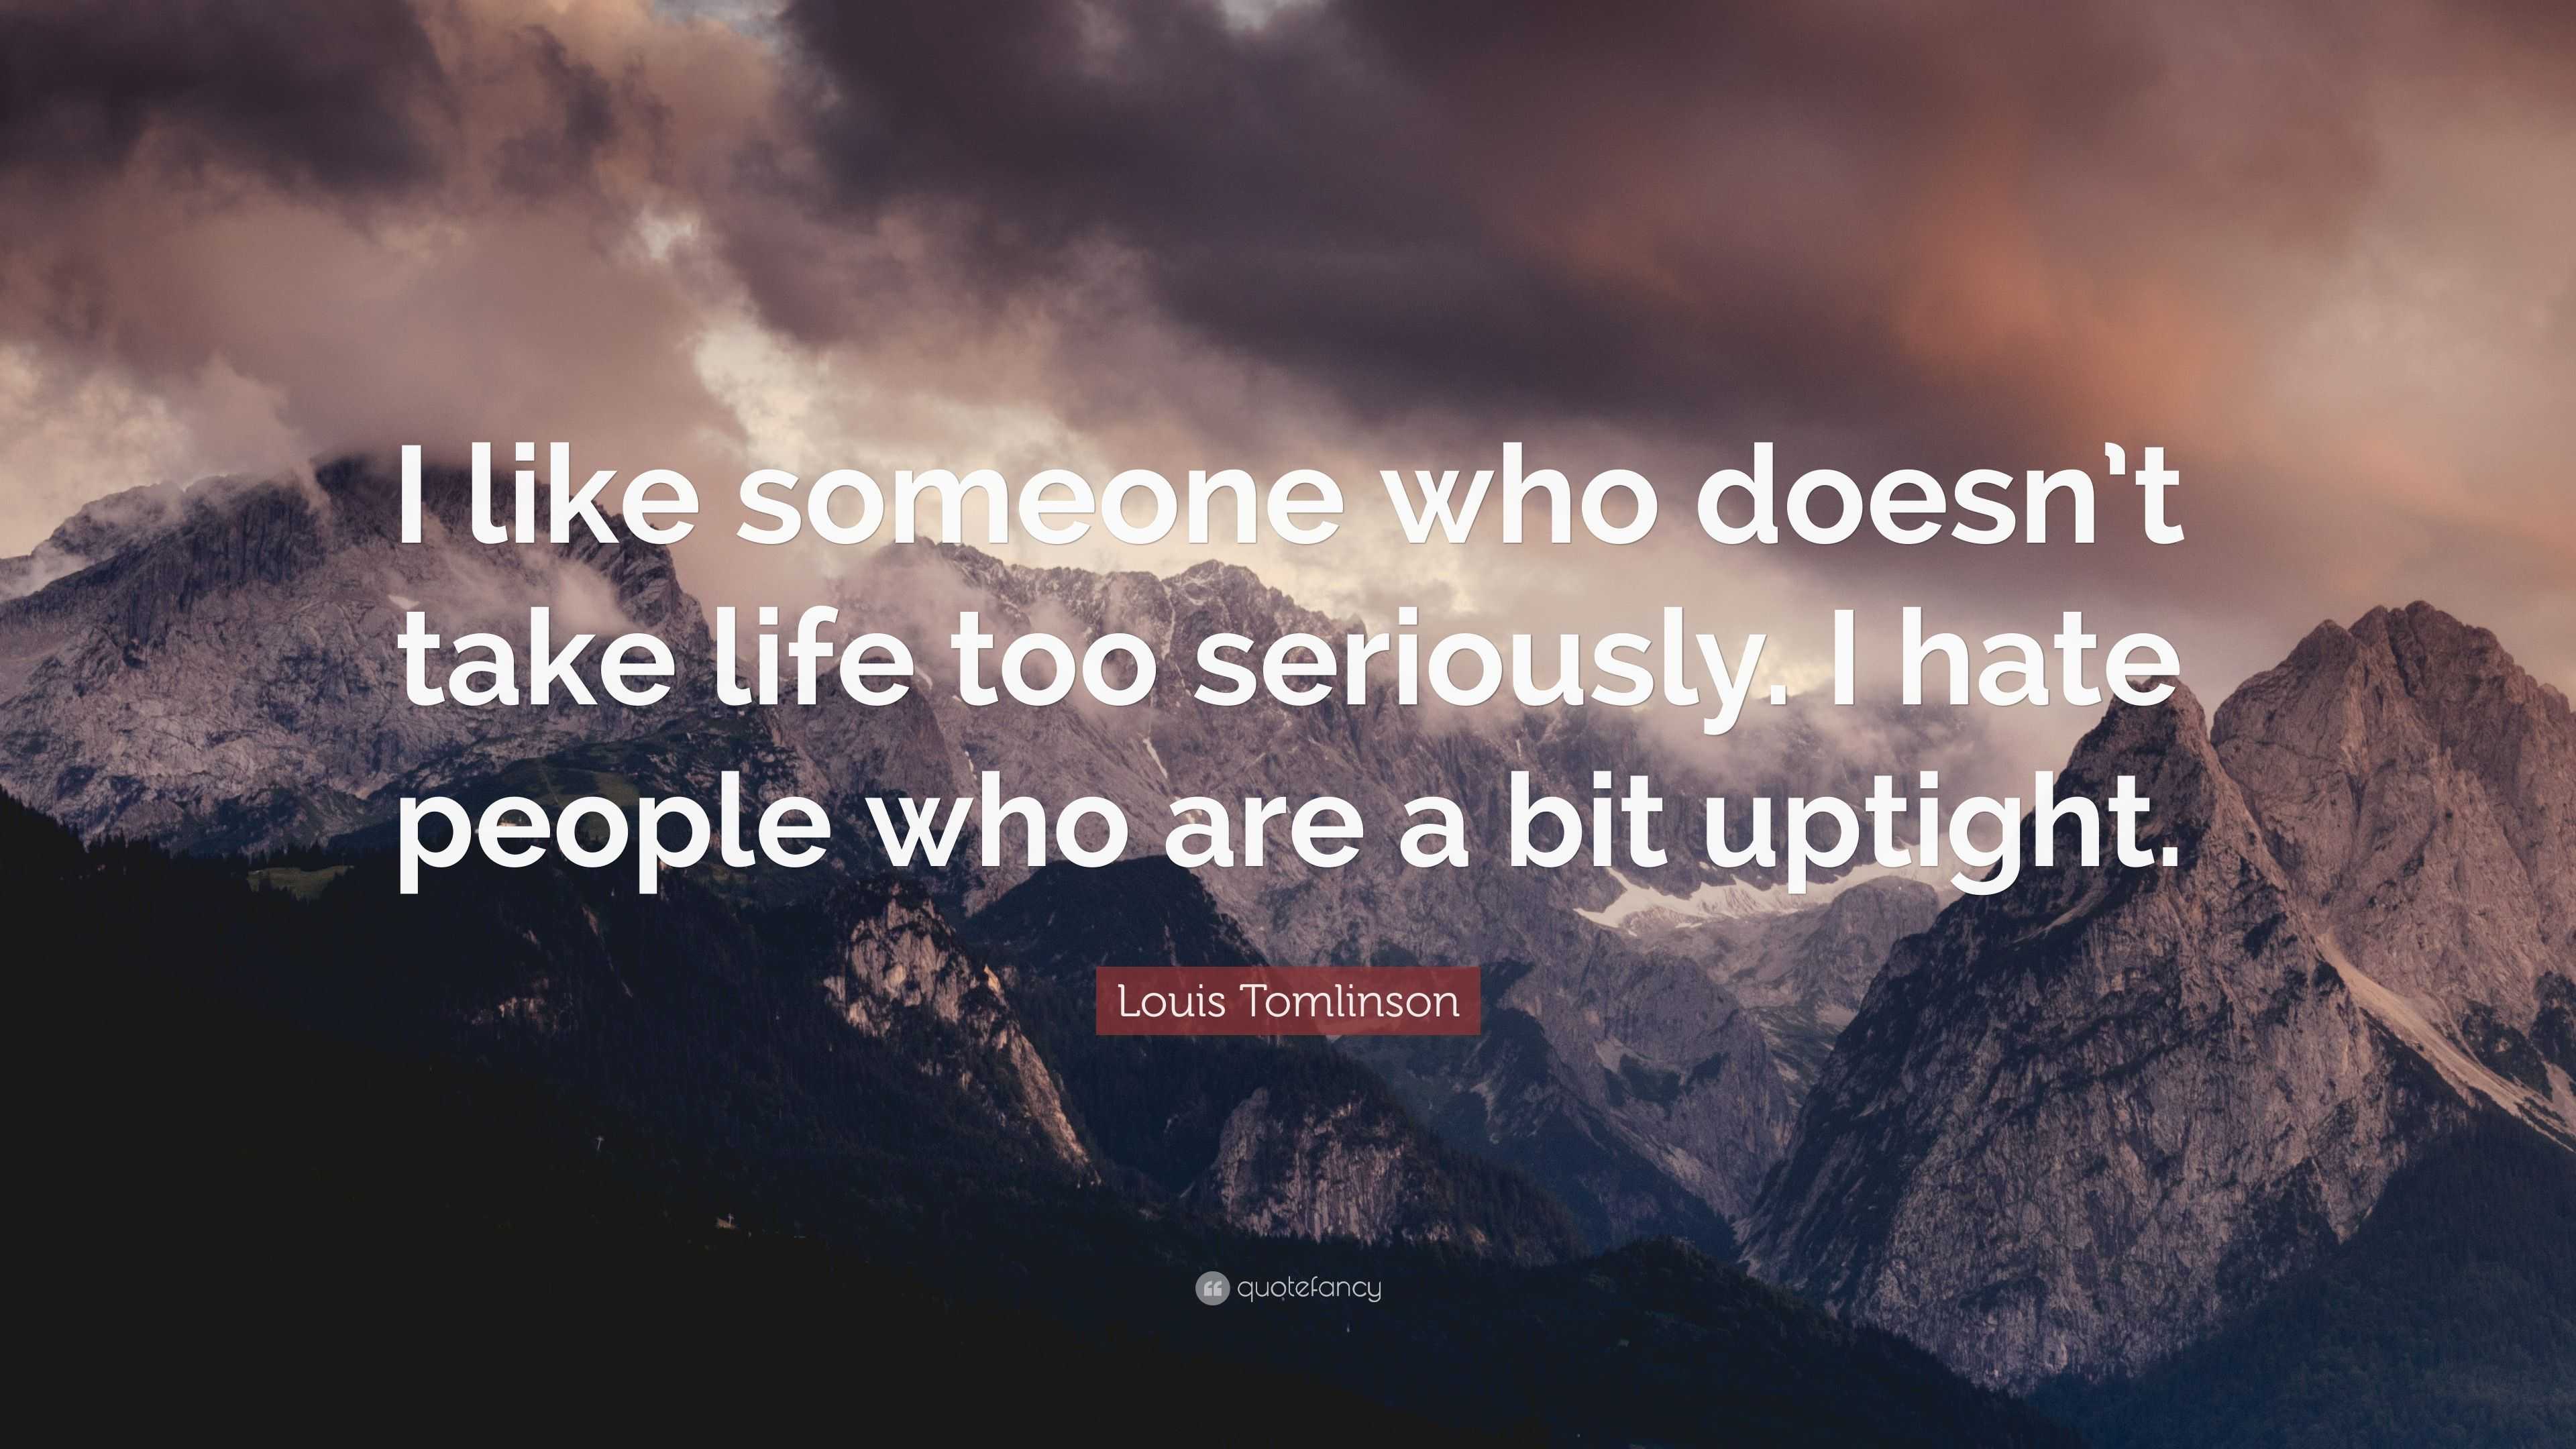 Louis Tomlinson Quote: “I like someone who doesn’t take life too seriously. I hate people who ...